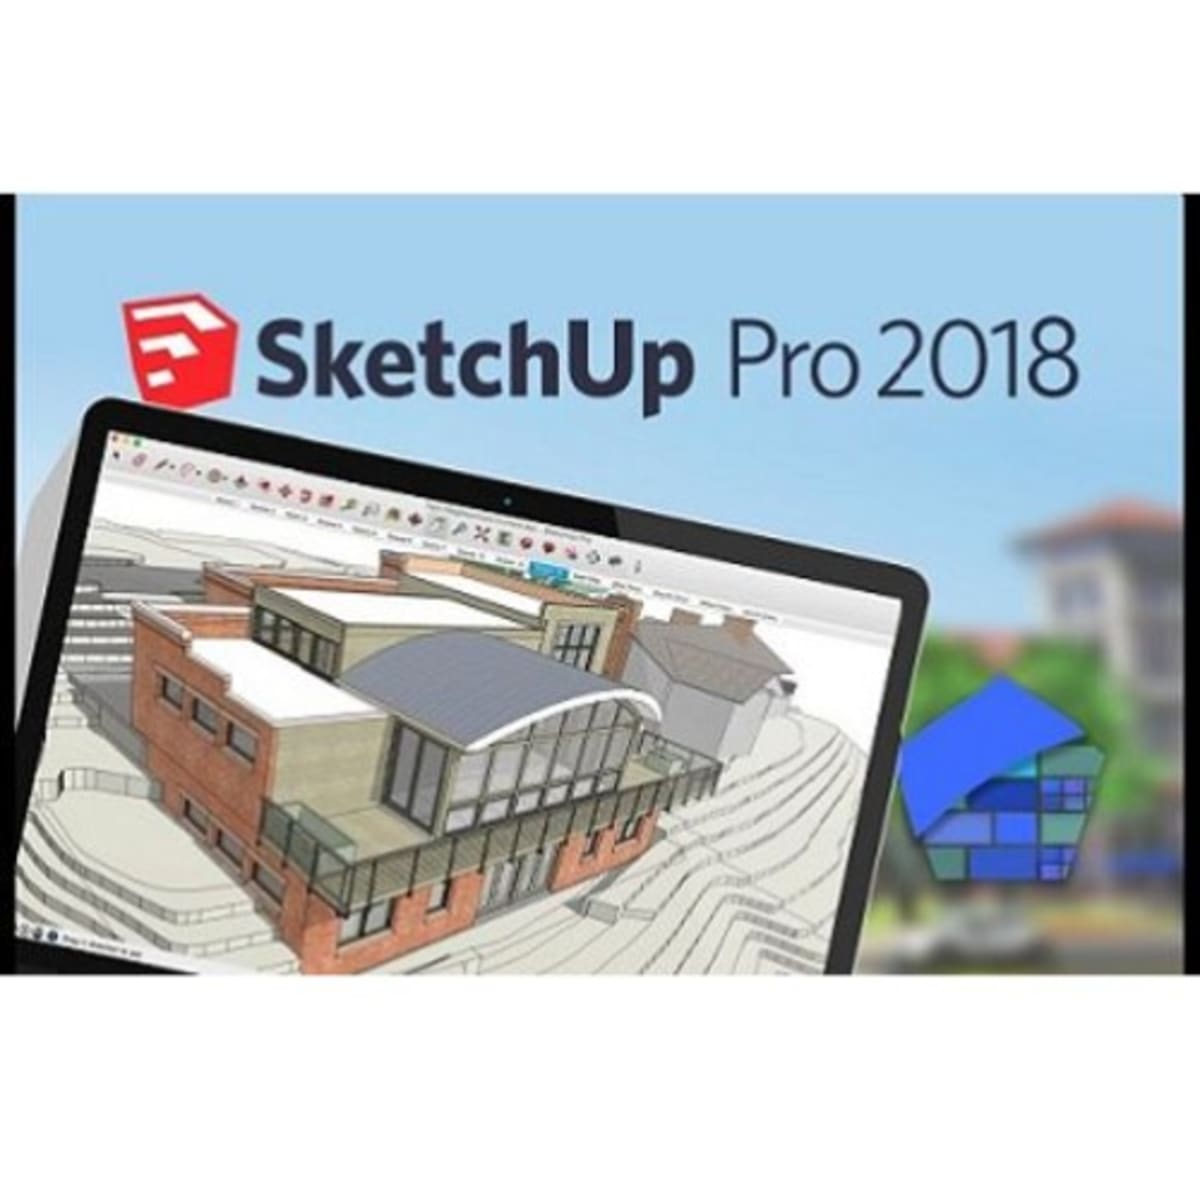 Sketchup Pro 2018 and Free 3D Warehouse download problems requiring a login  - Warehouses - SketchUp Community